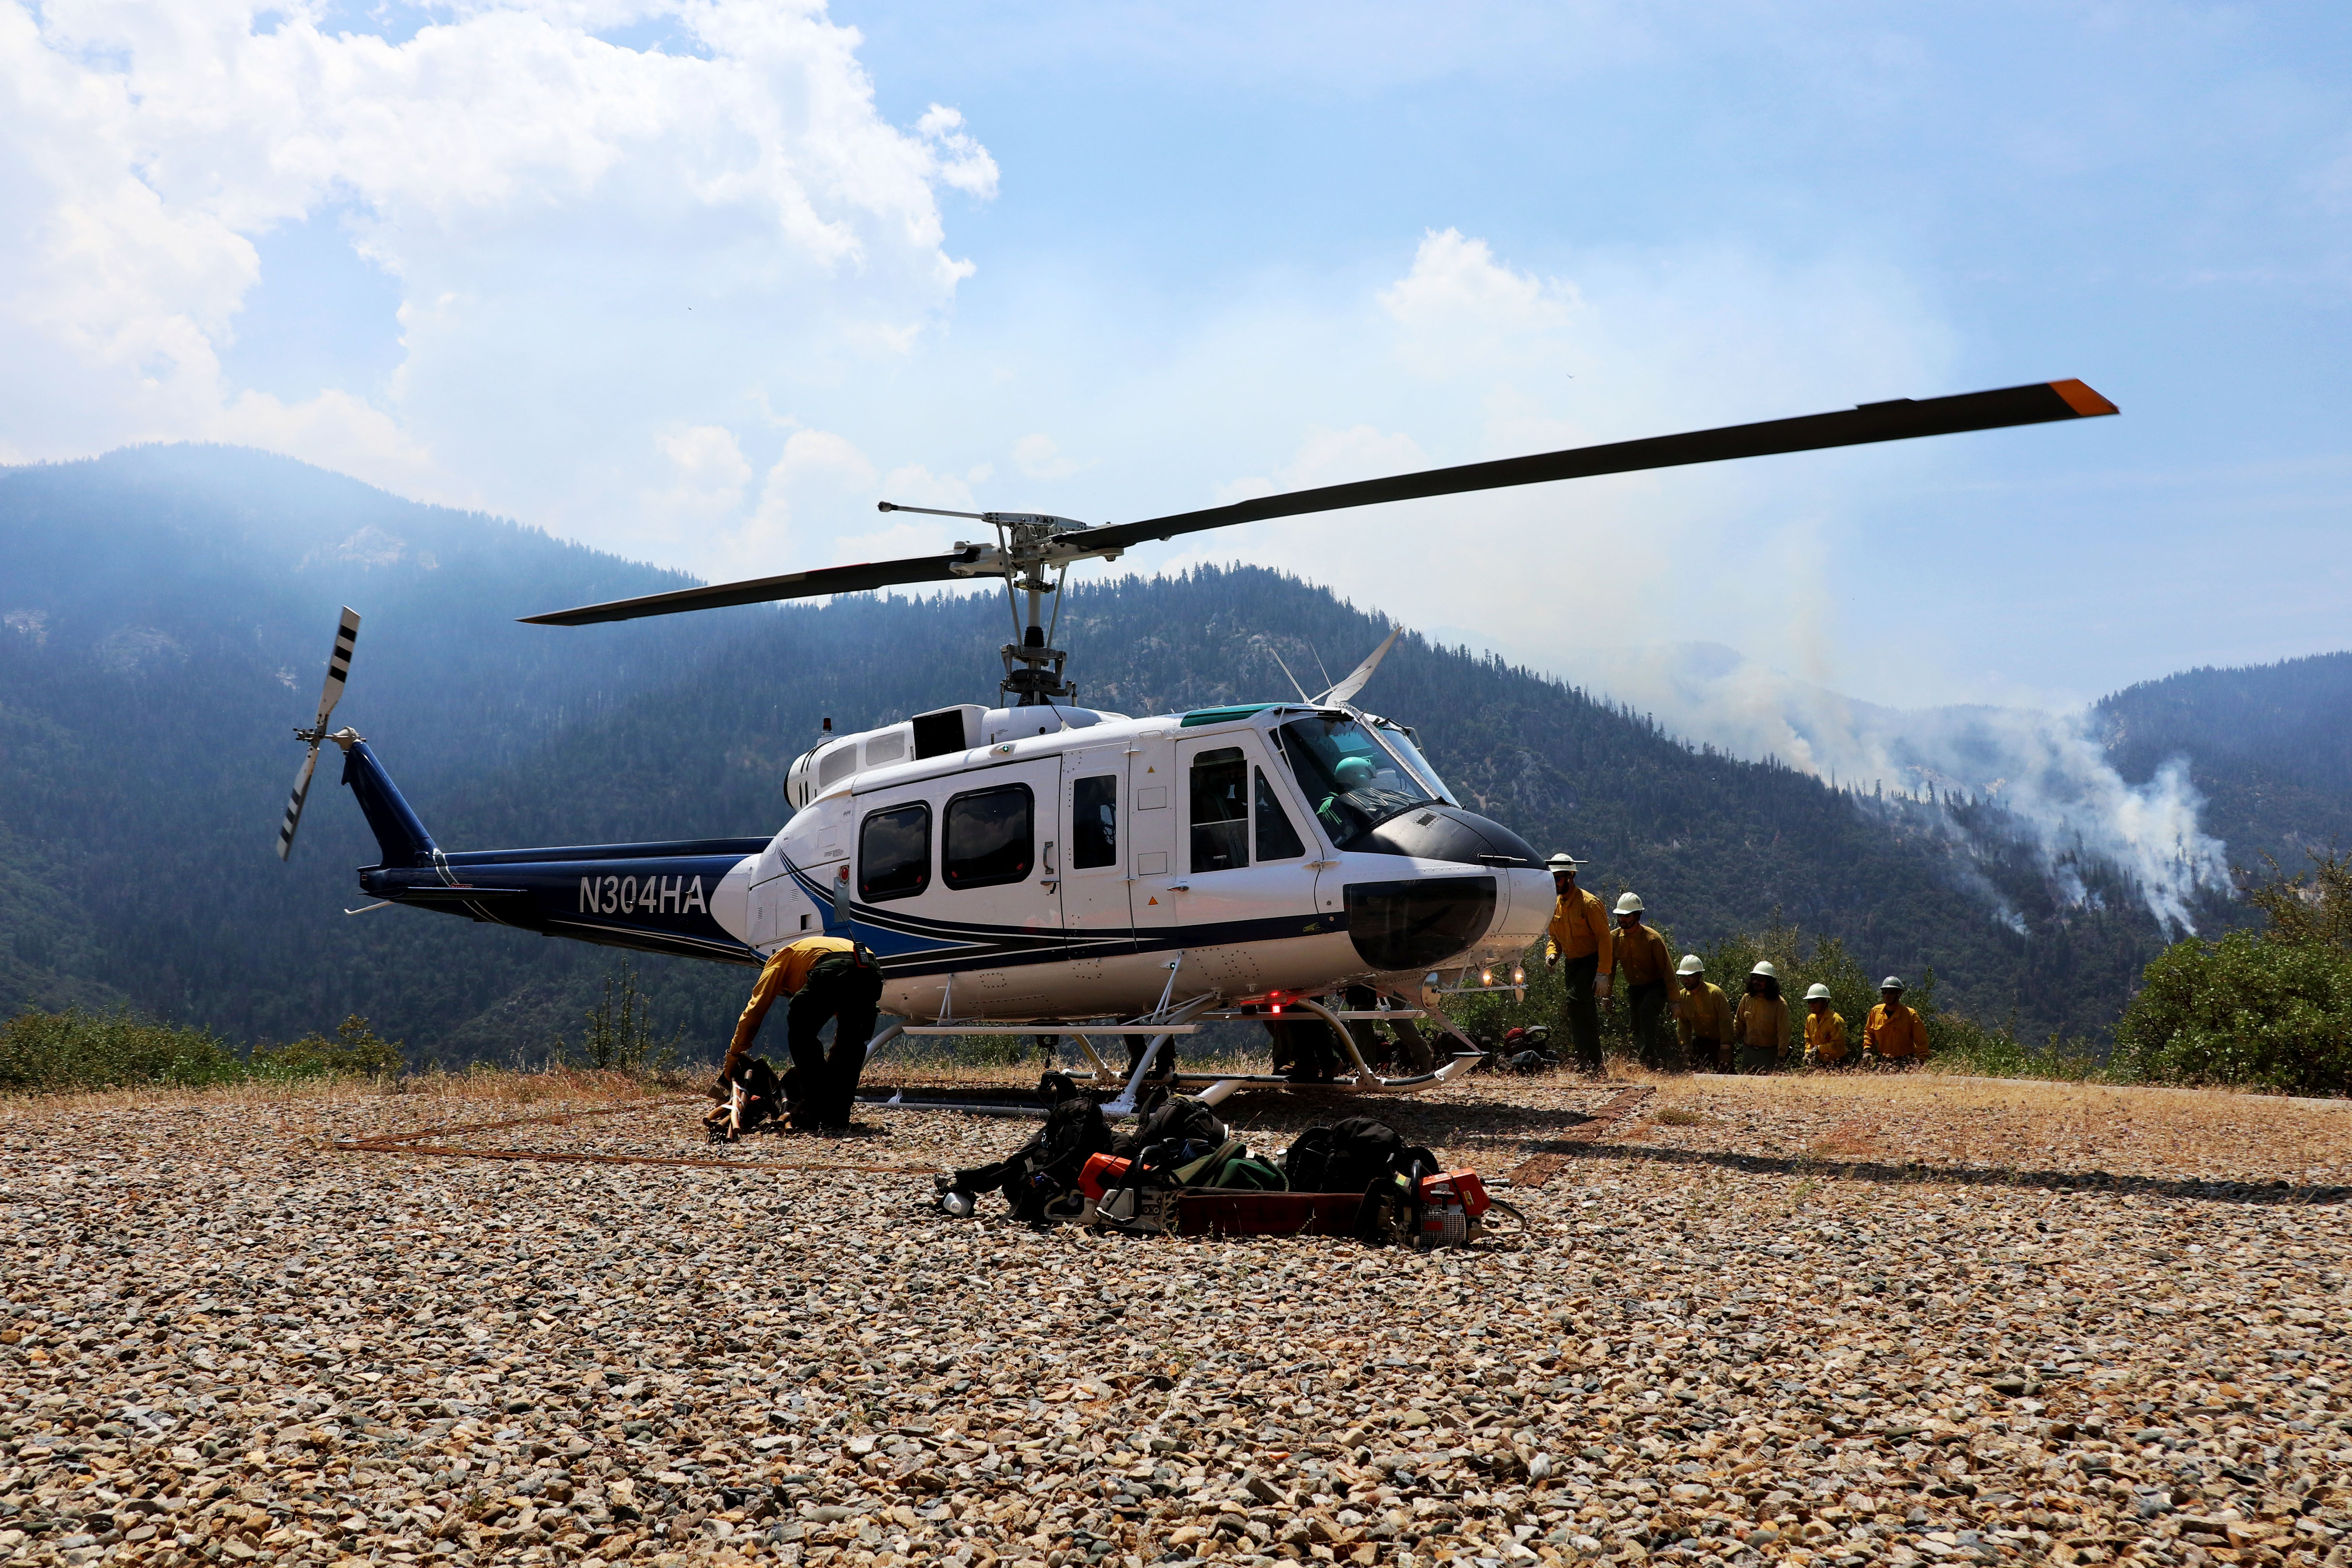 A fire crew lines-up prior to boarding a helicopter